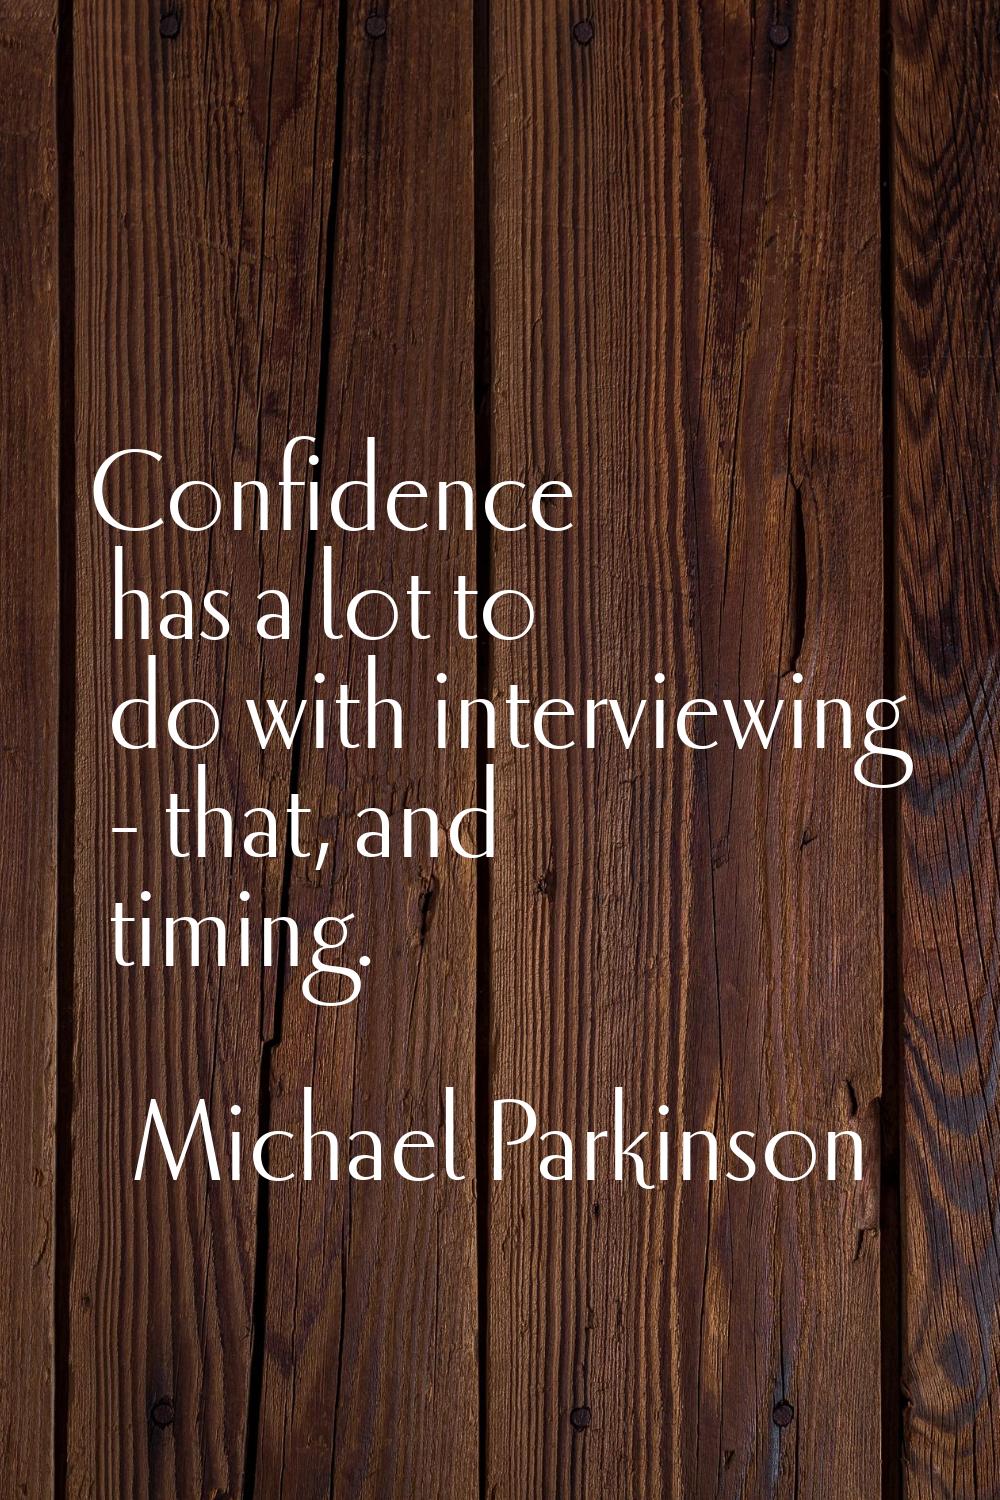 Confidence has a lot to do with interviewing - that, and timing.